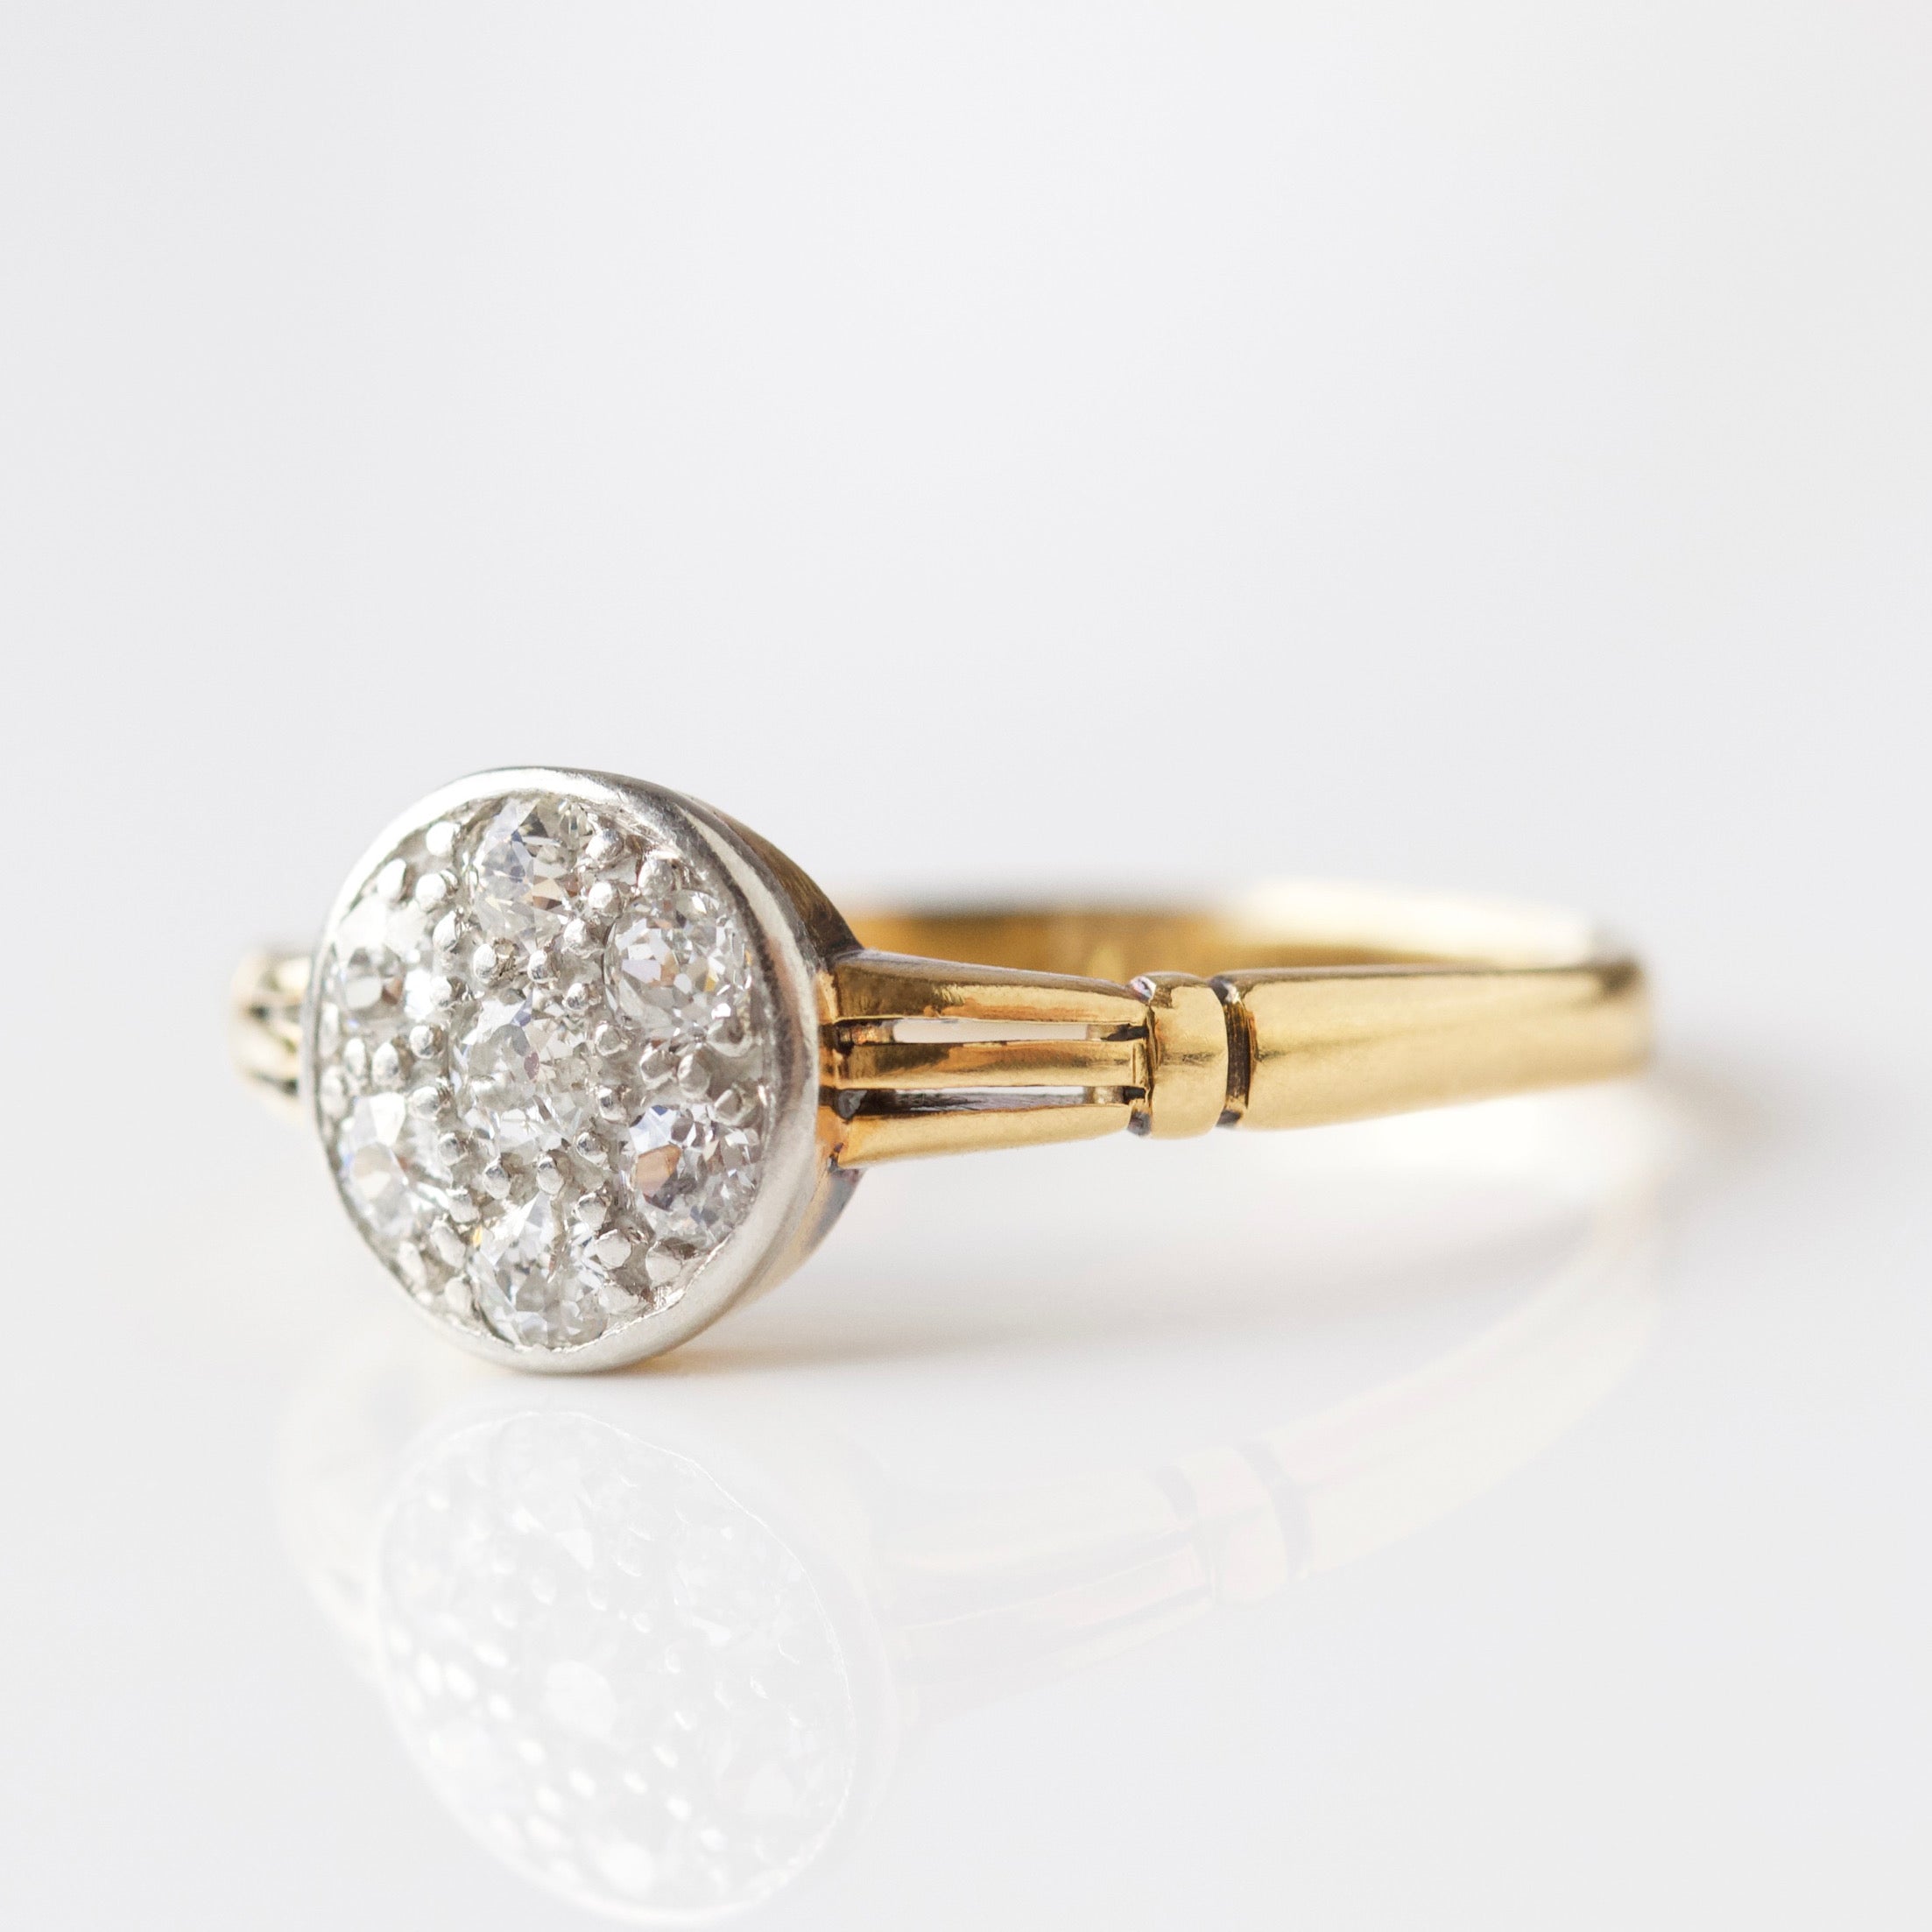 Diamond vintage ring in solid gold